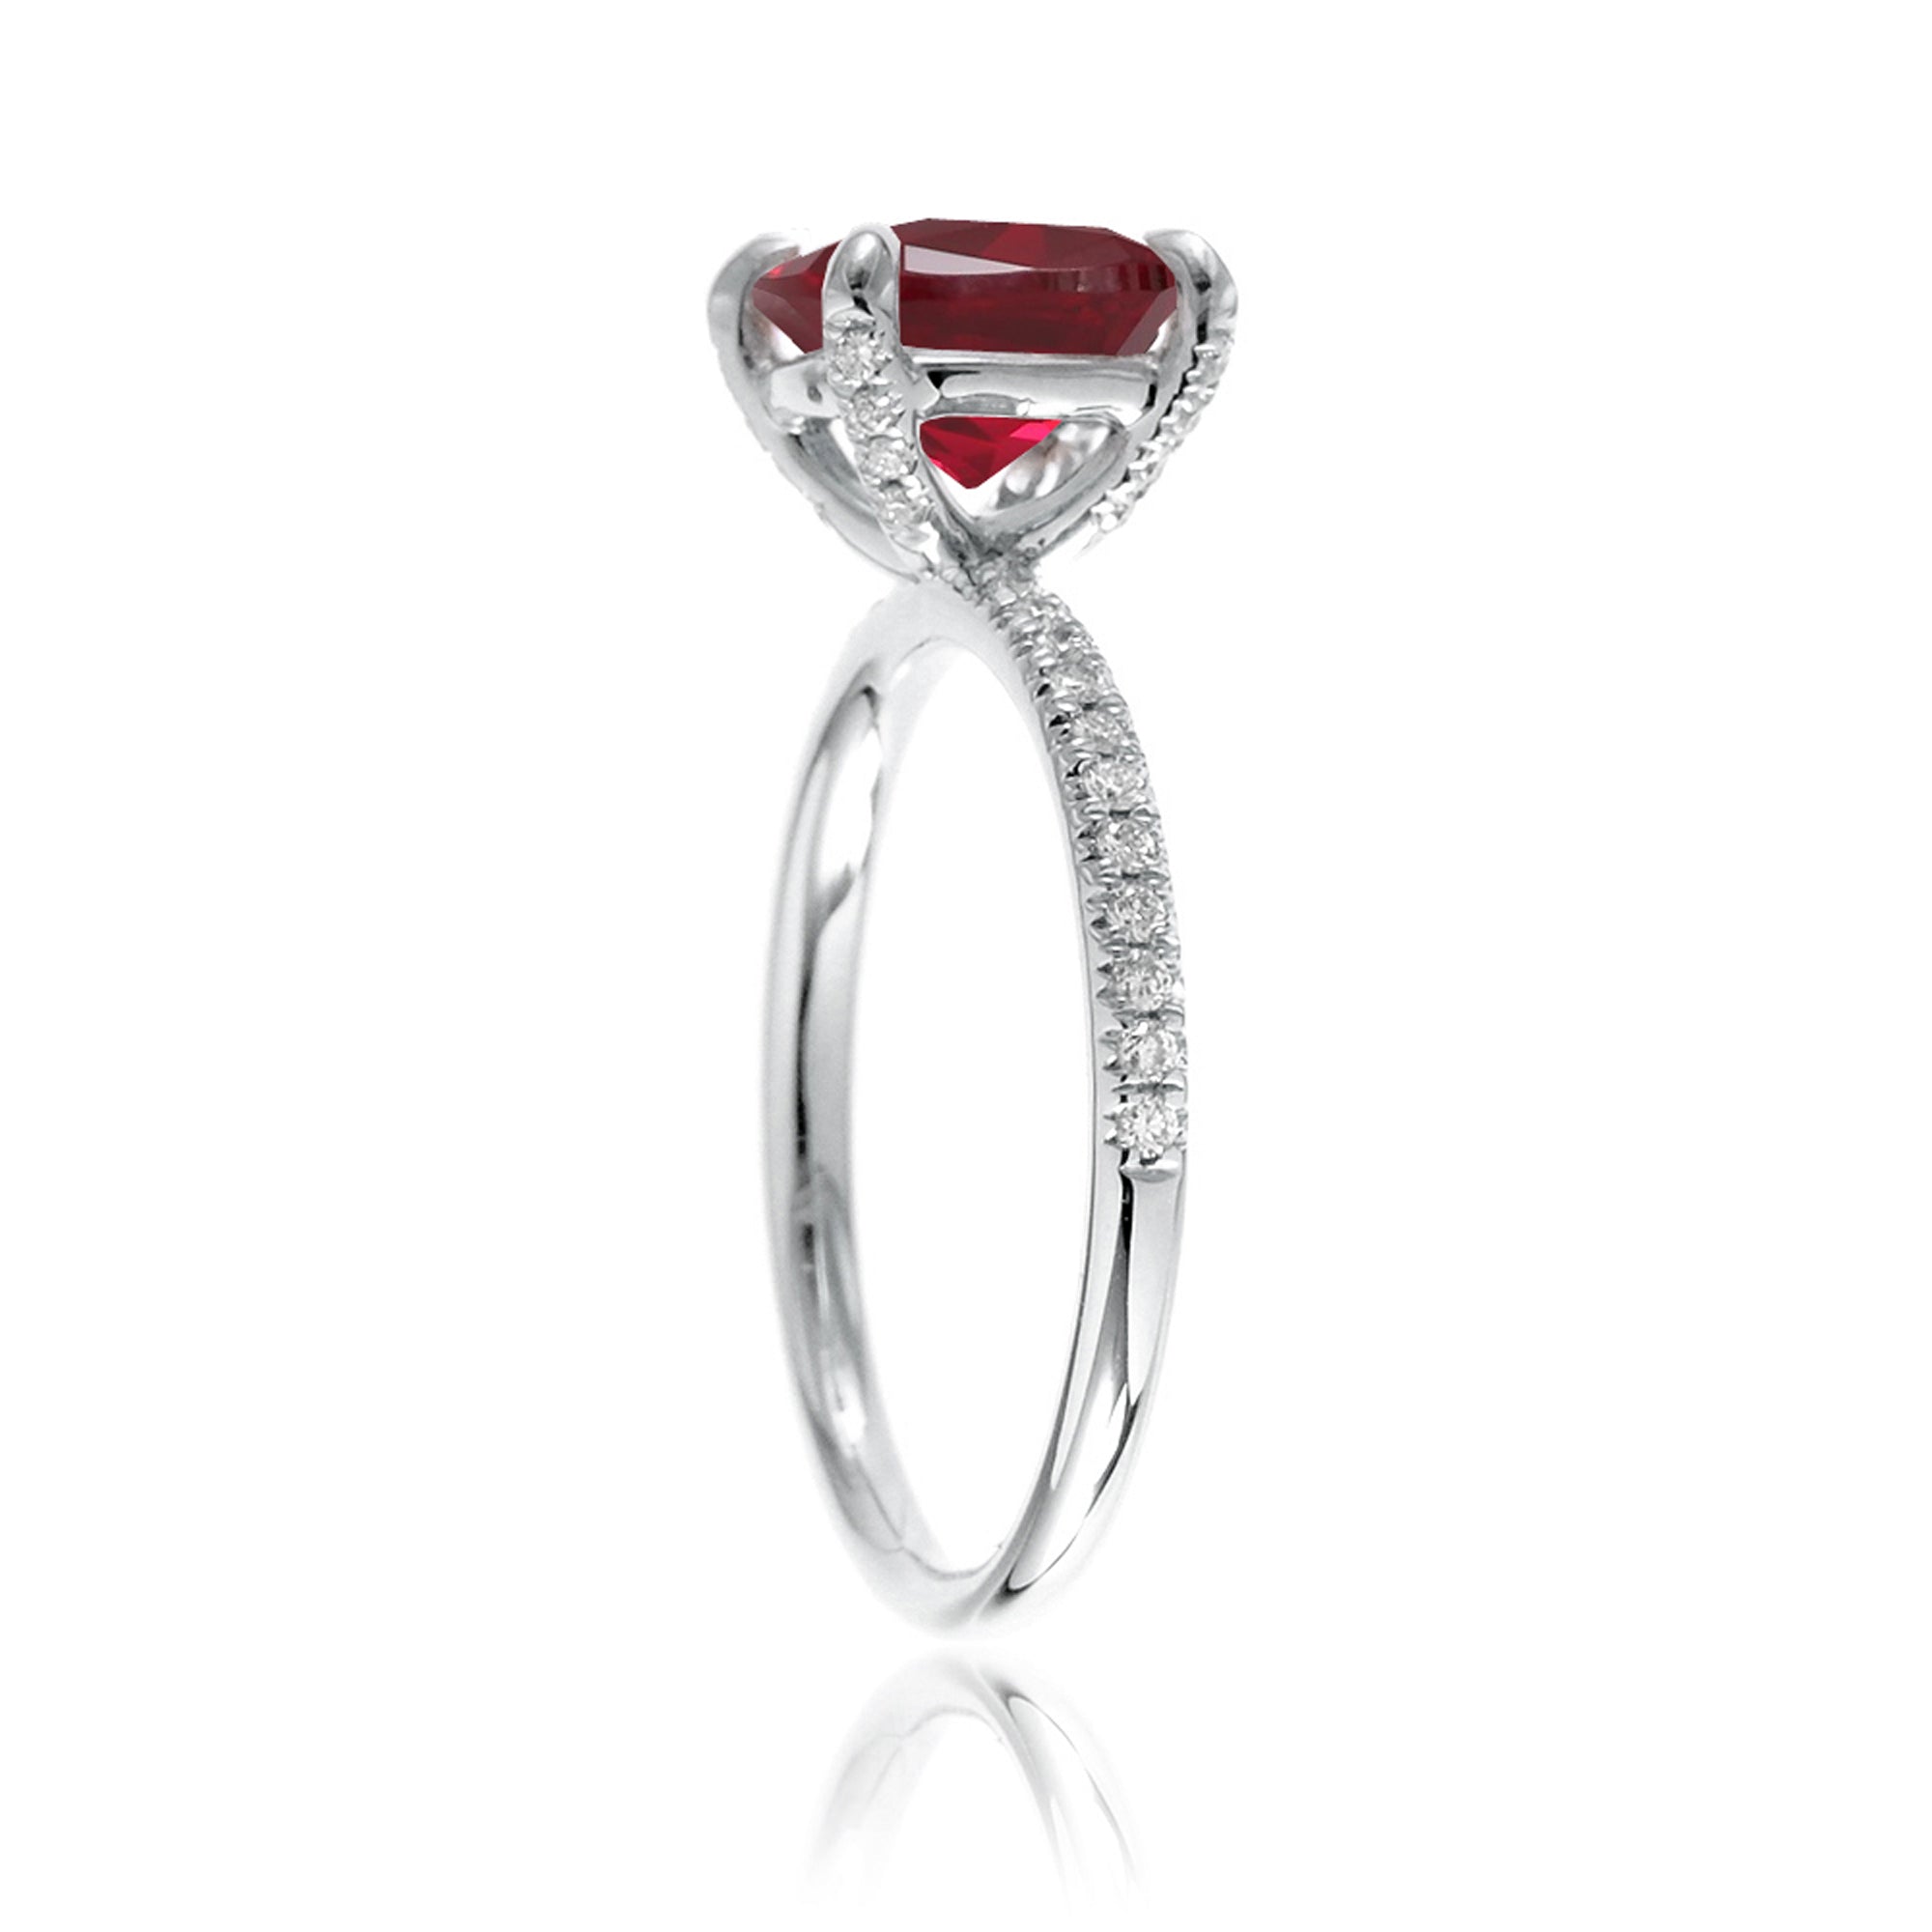 Oval lab-grown ruby diamond band engagement ring white gold - the Ava